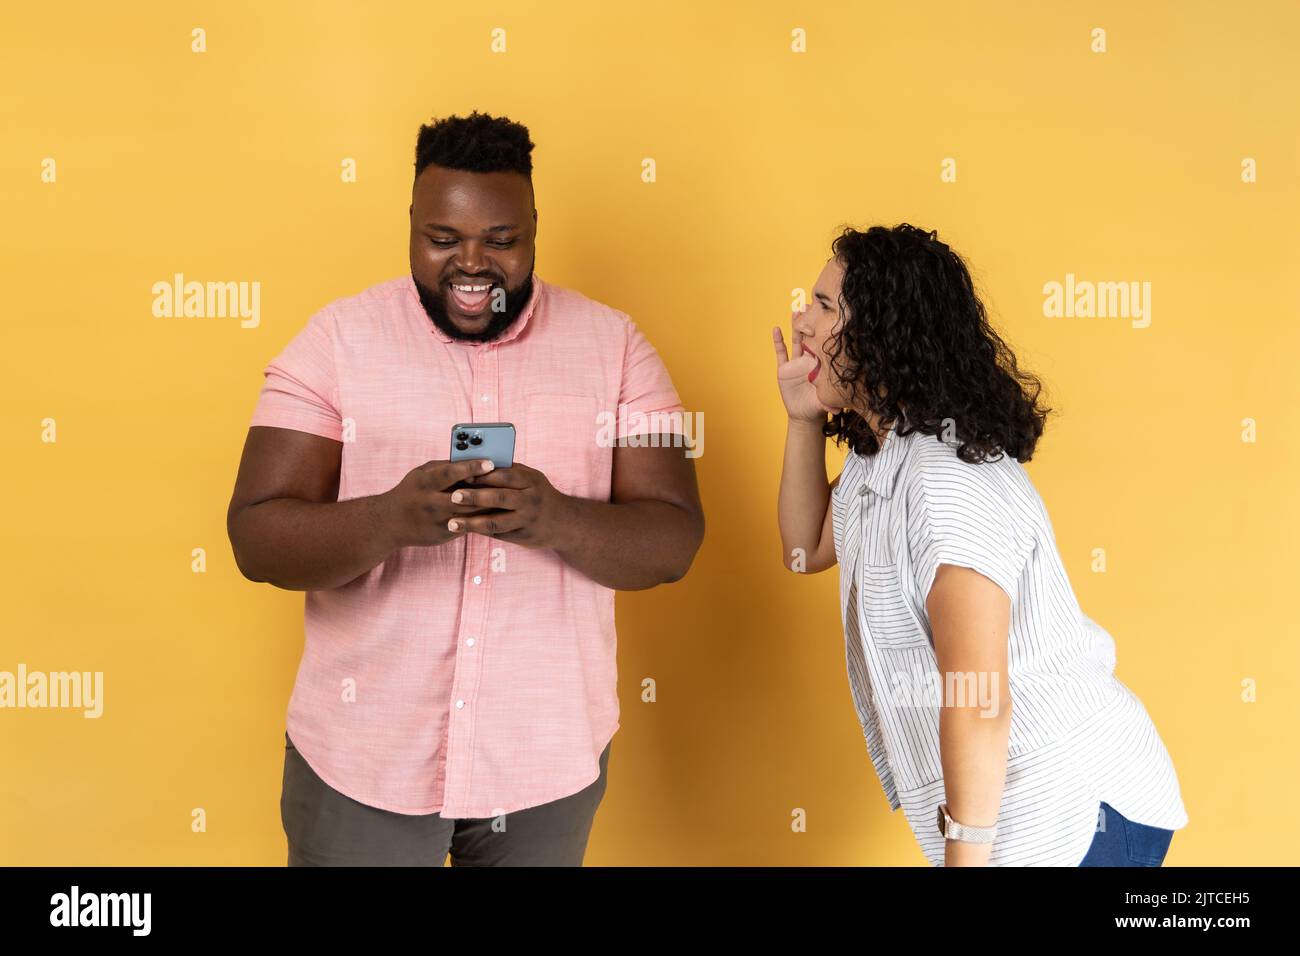 Young couple in casual clothing standing together, woman desperately screaming near happy man using phone and ignoring her, attracting his attention. Indoor studio shot isolated on yellow background. Stock Photo